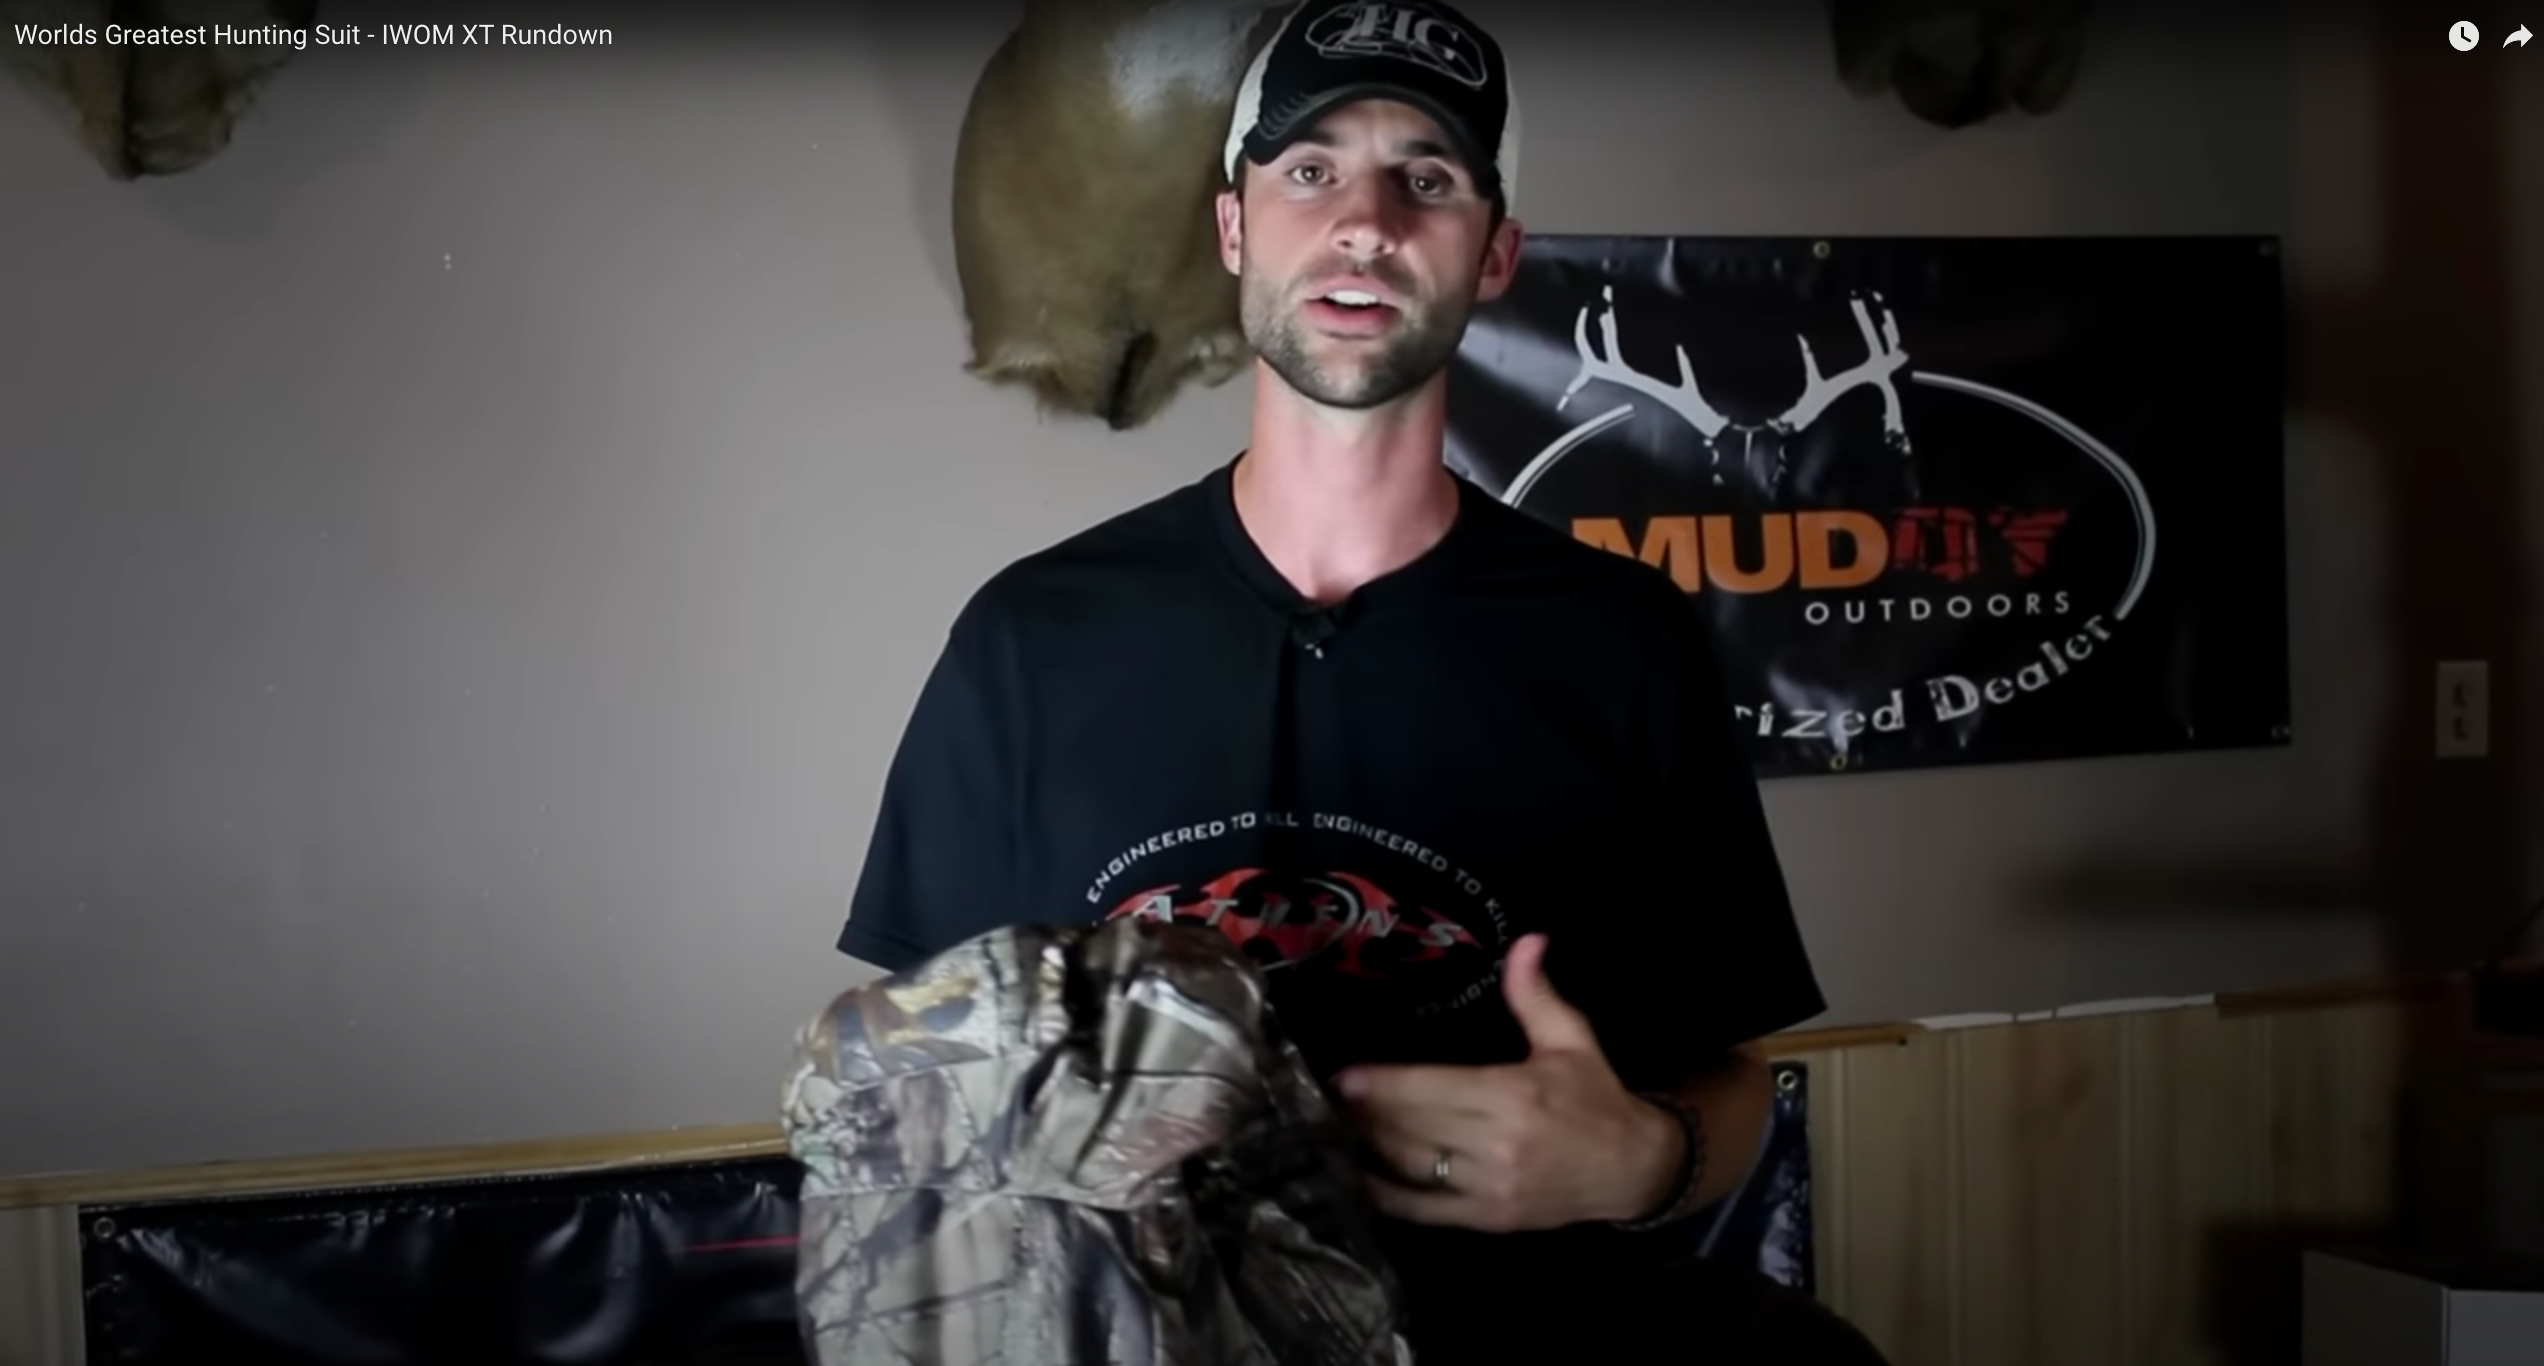 Load video: IWOM COLD WEATHER HUNTING CLOTHES FOR ARCHERY WHITETAIL SEASON